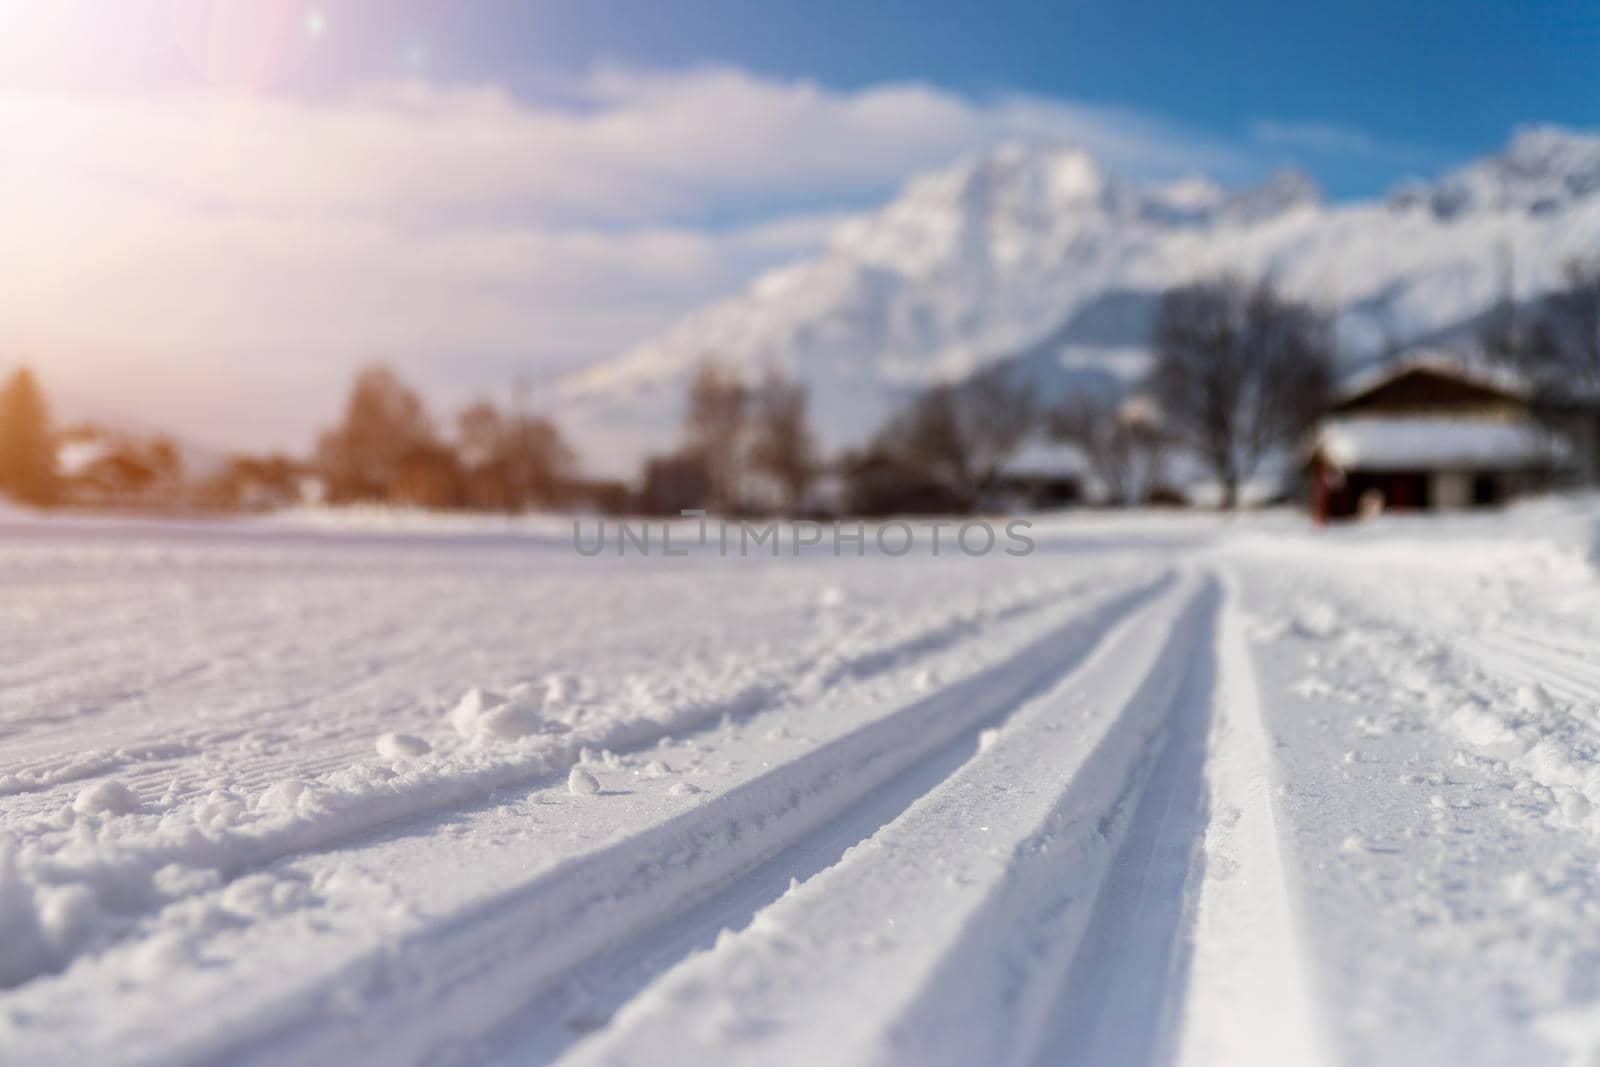 Cross-country skiing in Austria: Slope, fresh white powder snow and mountains, blurry background by Daxenbichler